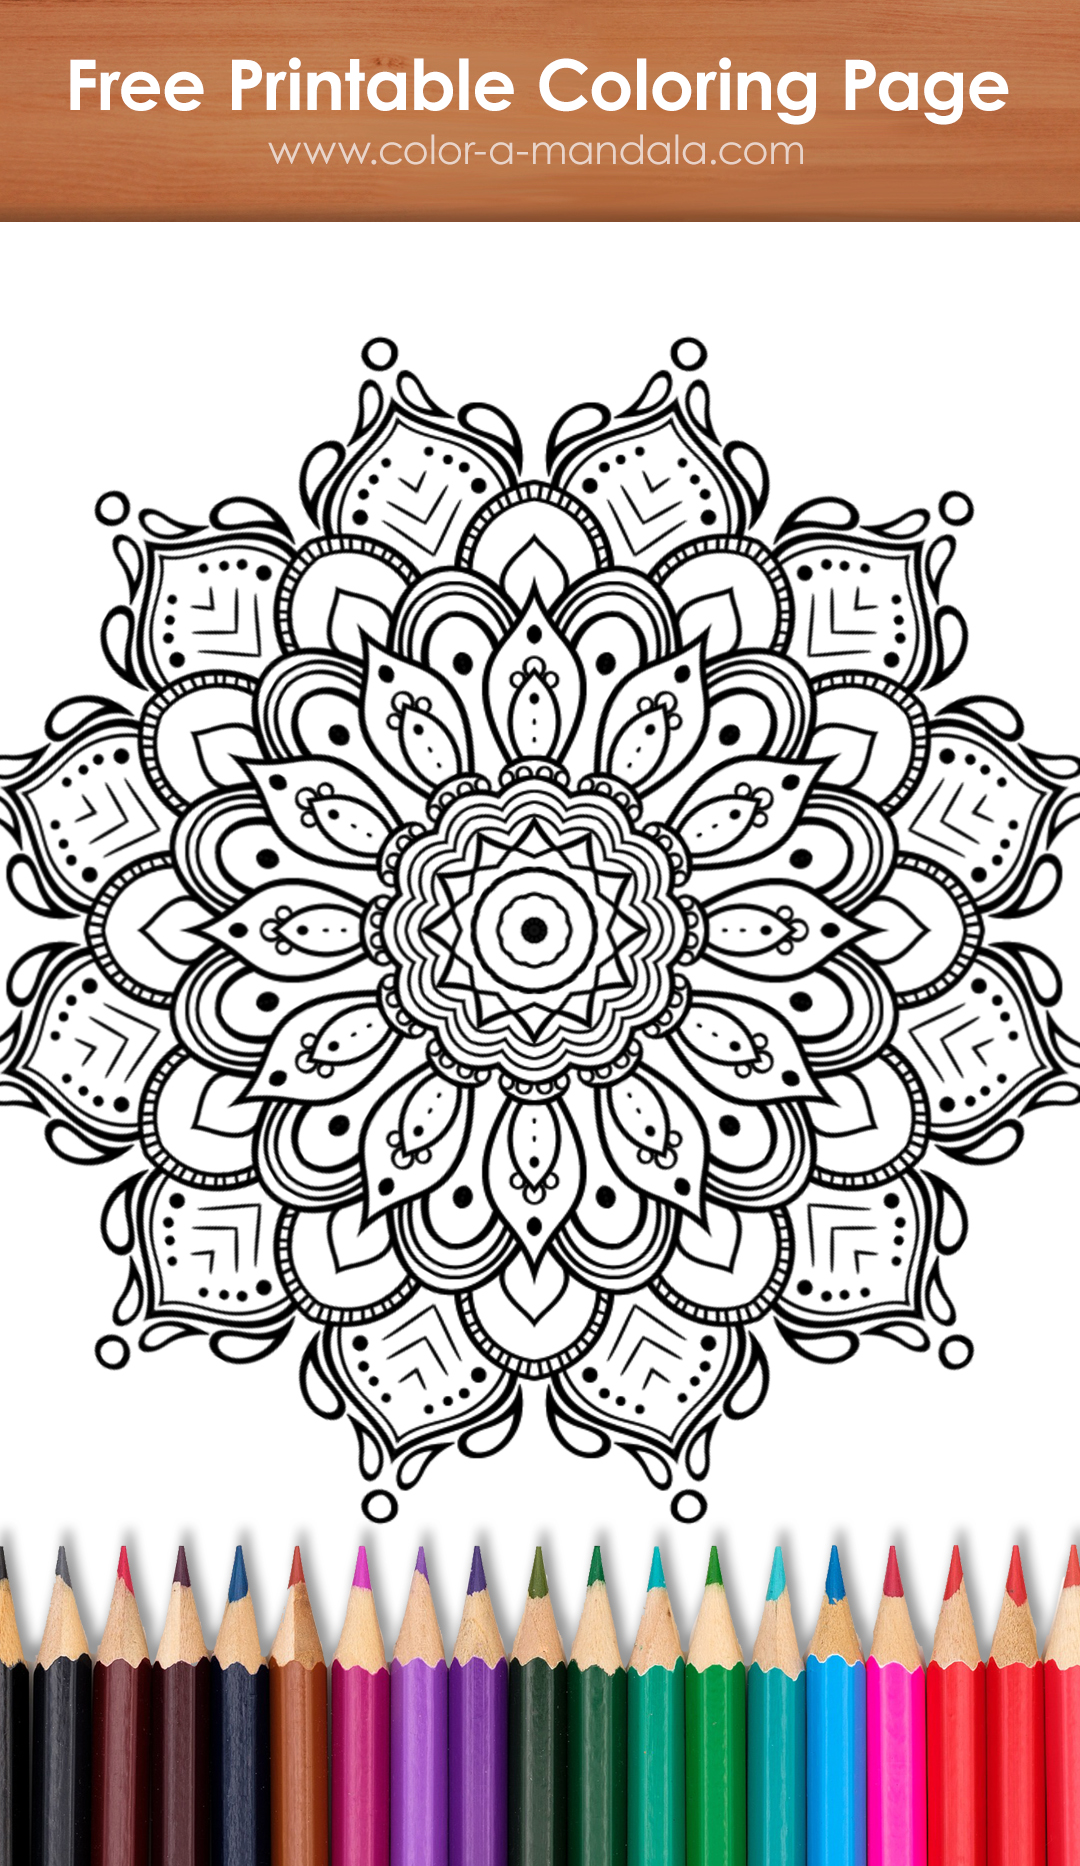 Image of an uncolored printable flower mandala coloring page.